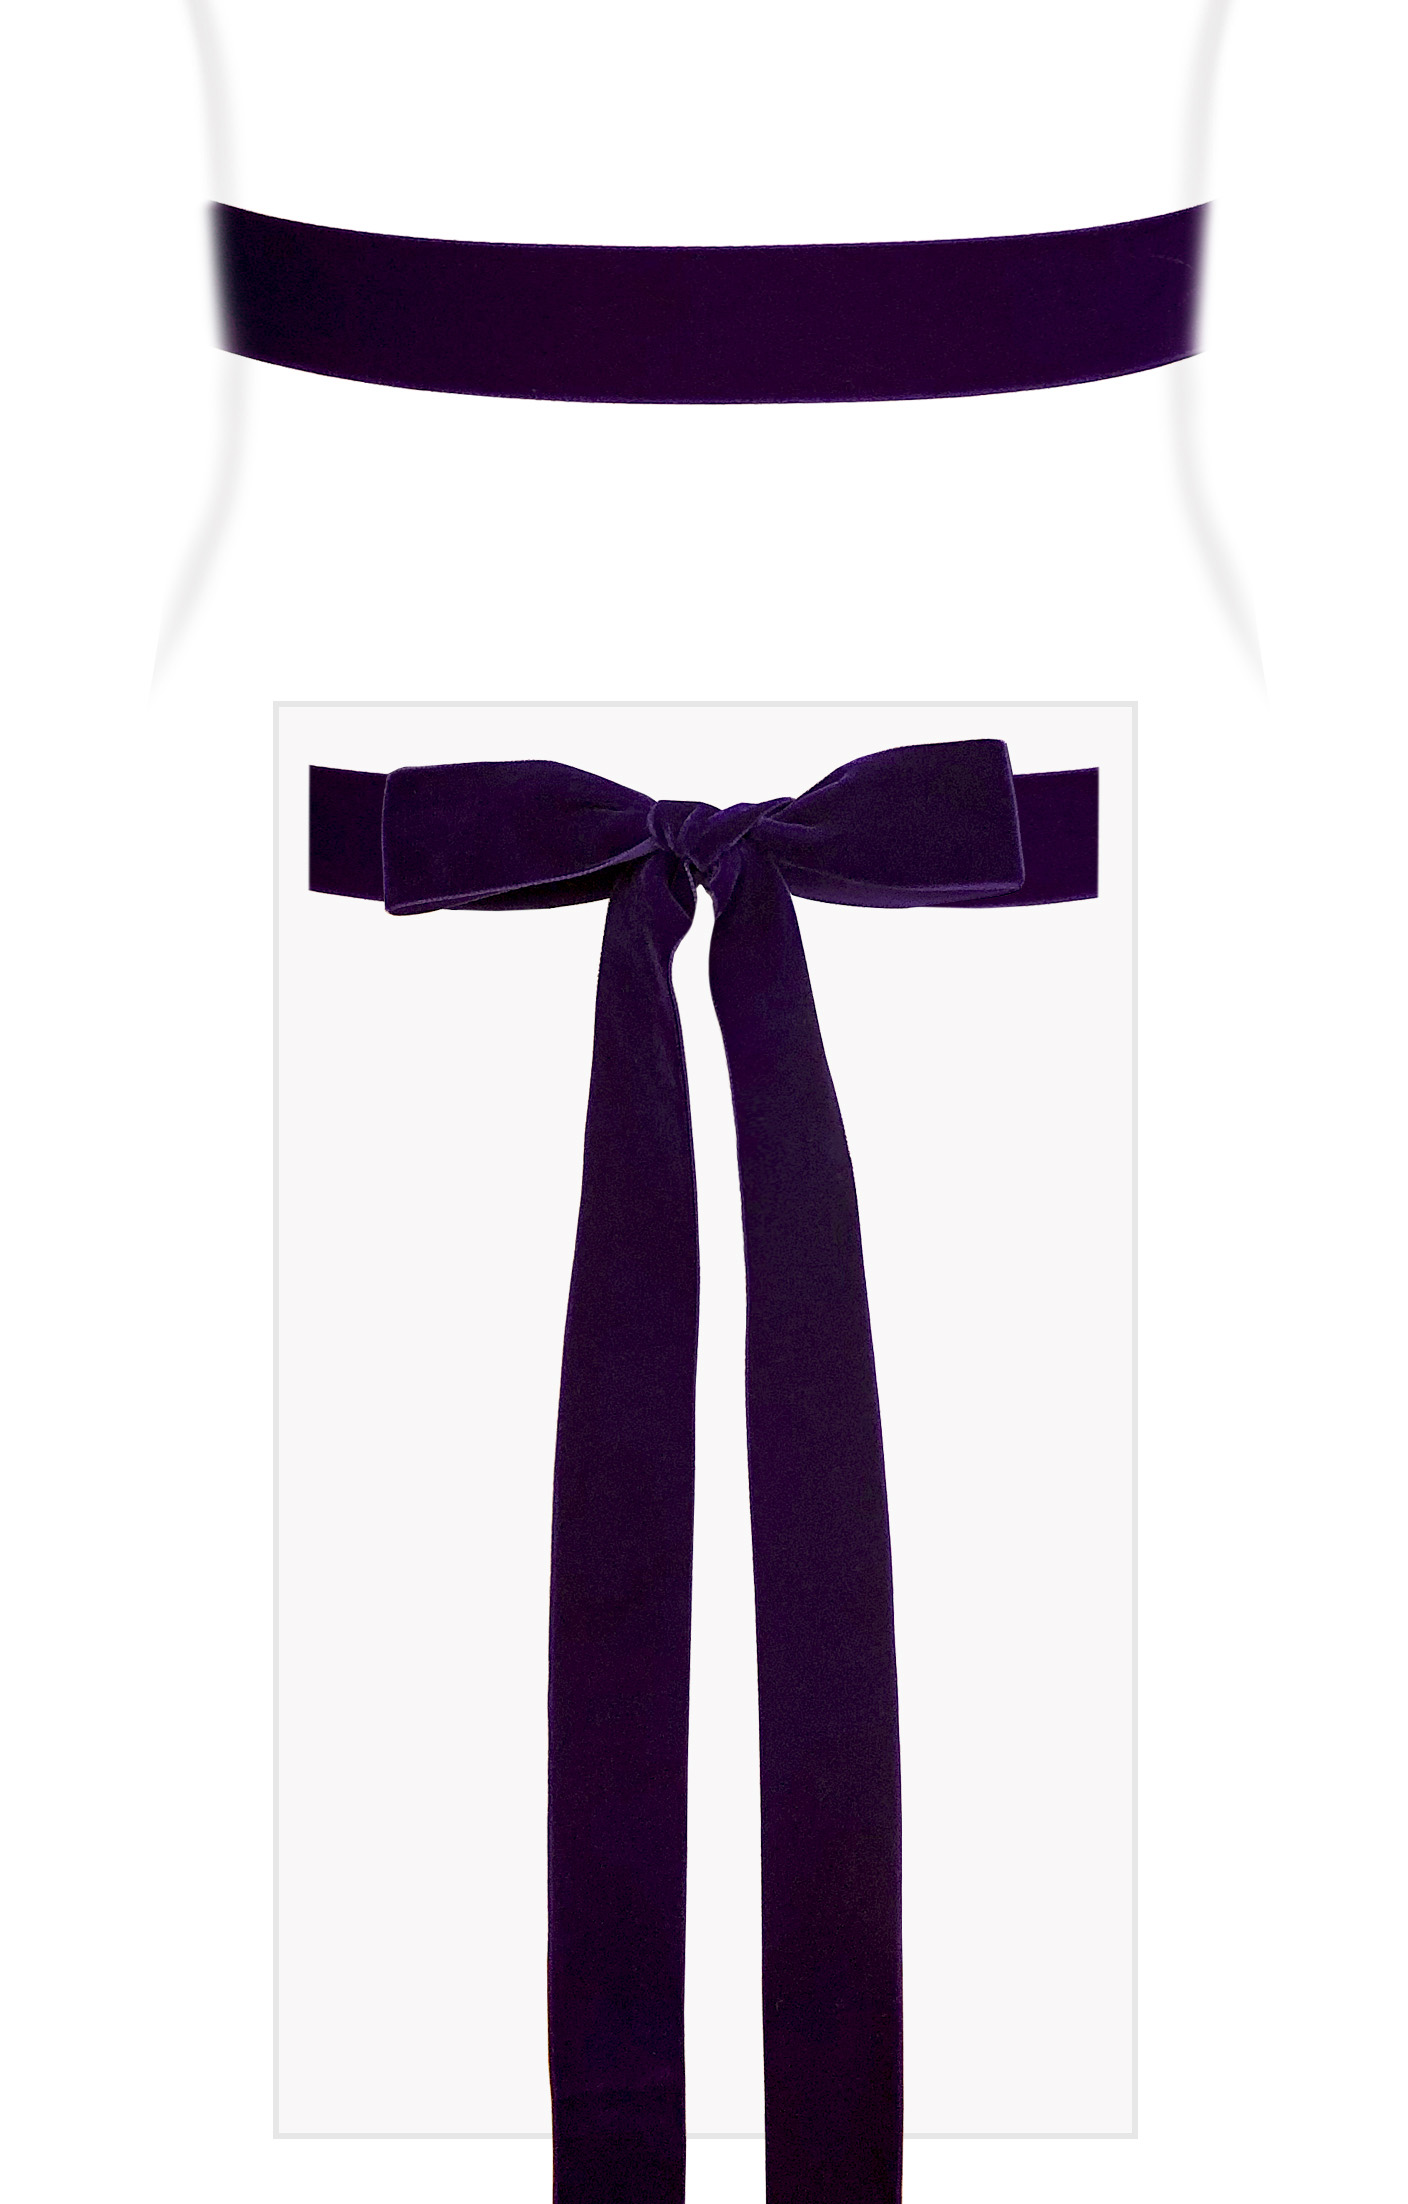 Velvet Ribbon Sash Purple - Wedding Dresses, Evening Wear and Party Clothes  by Alie Street.